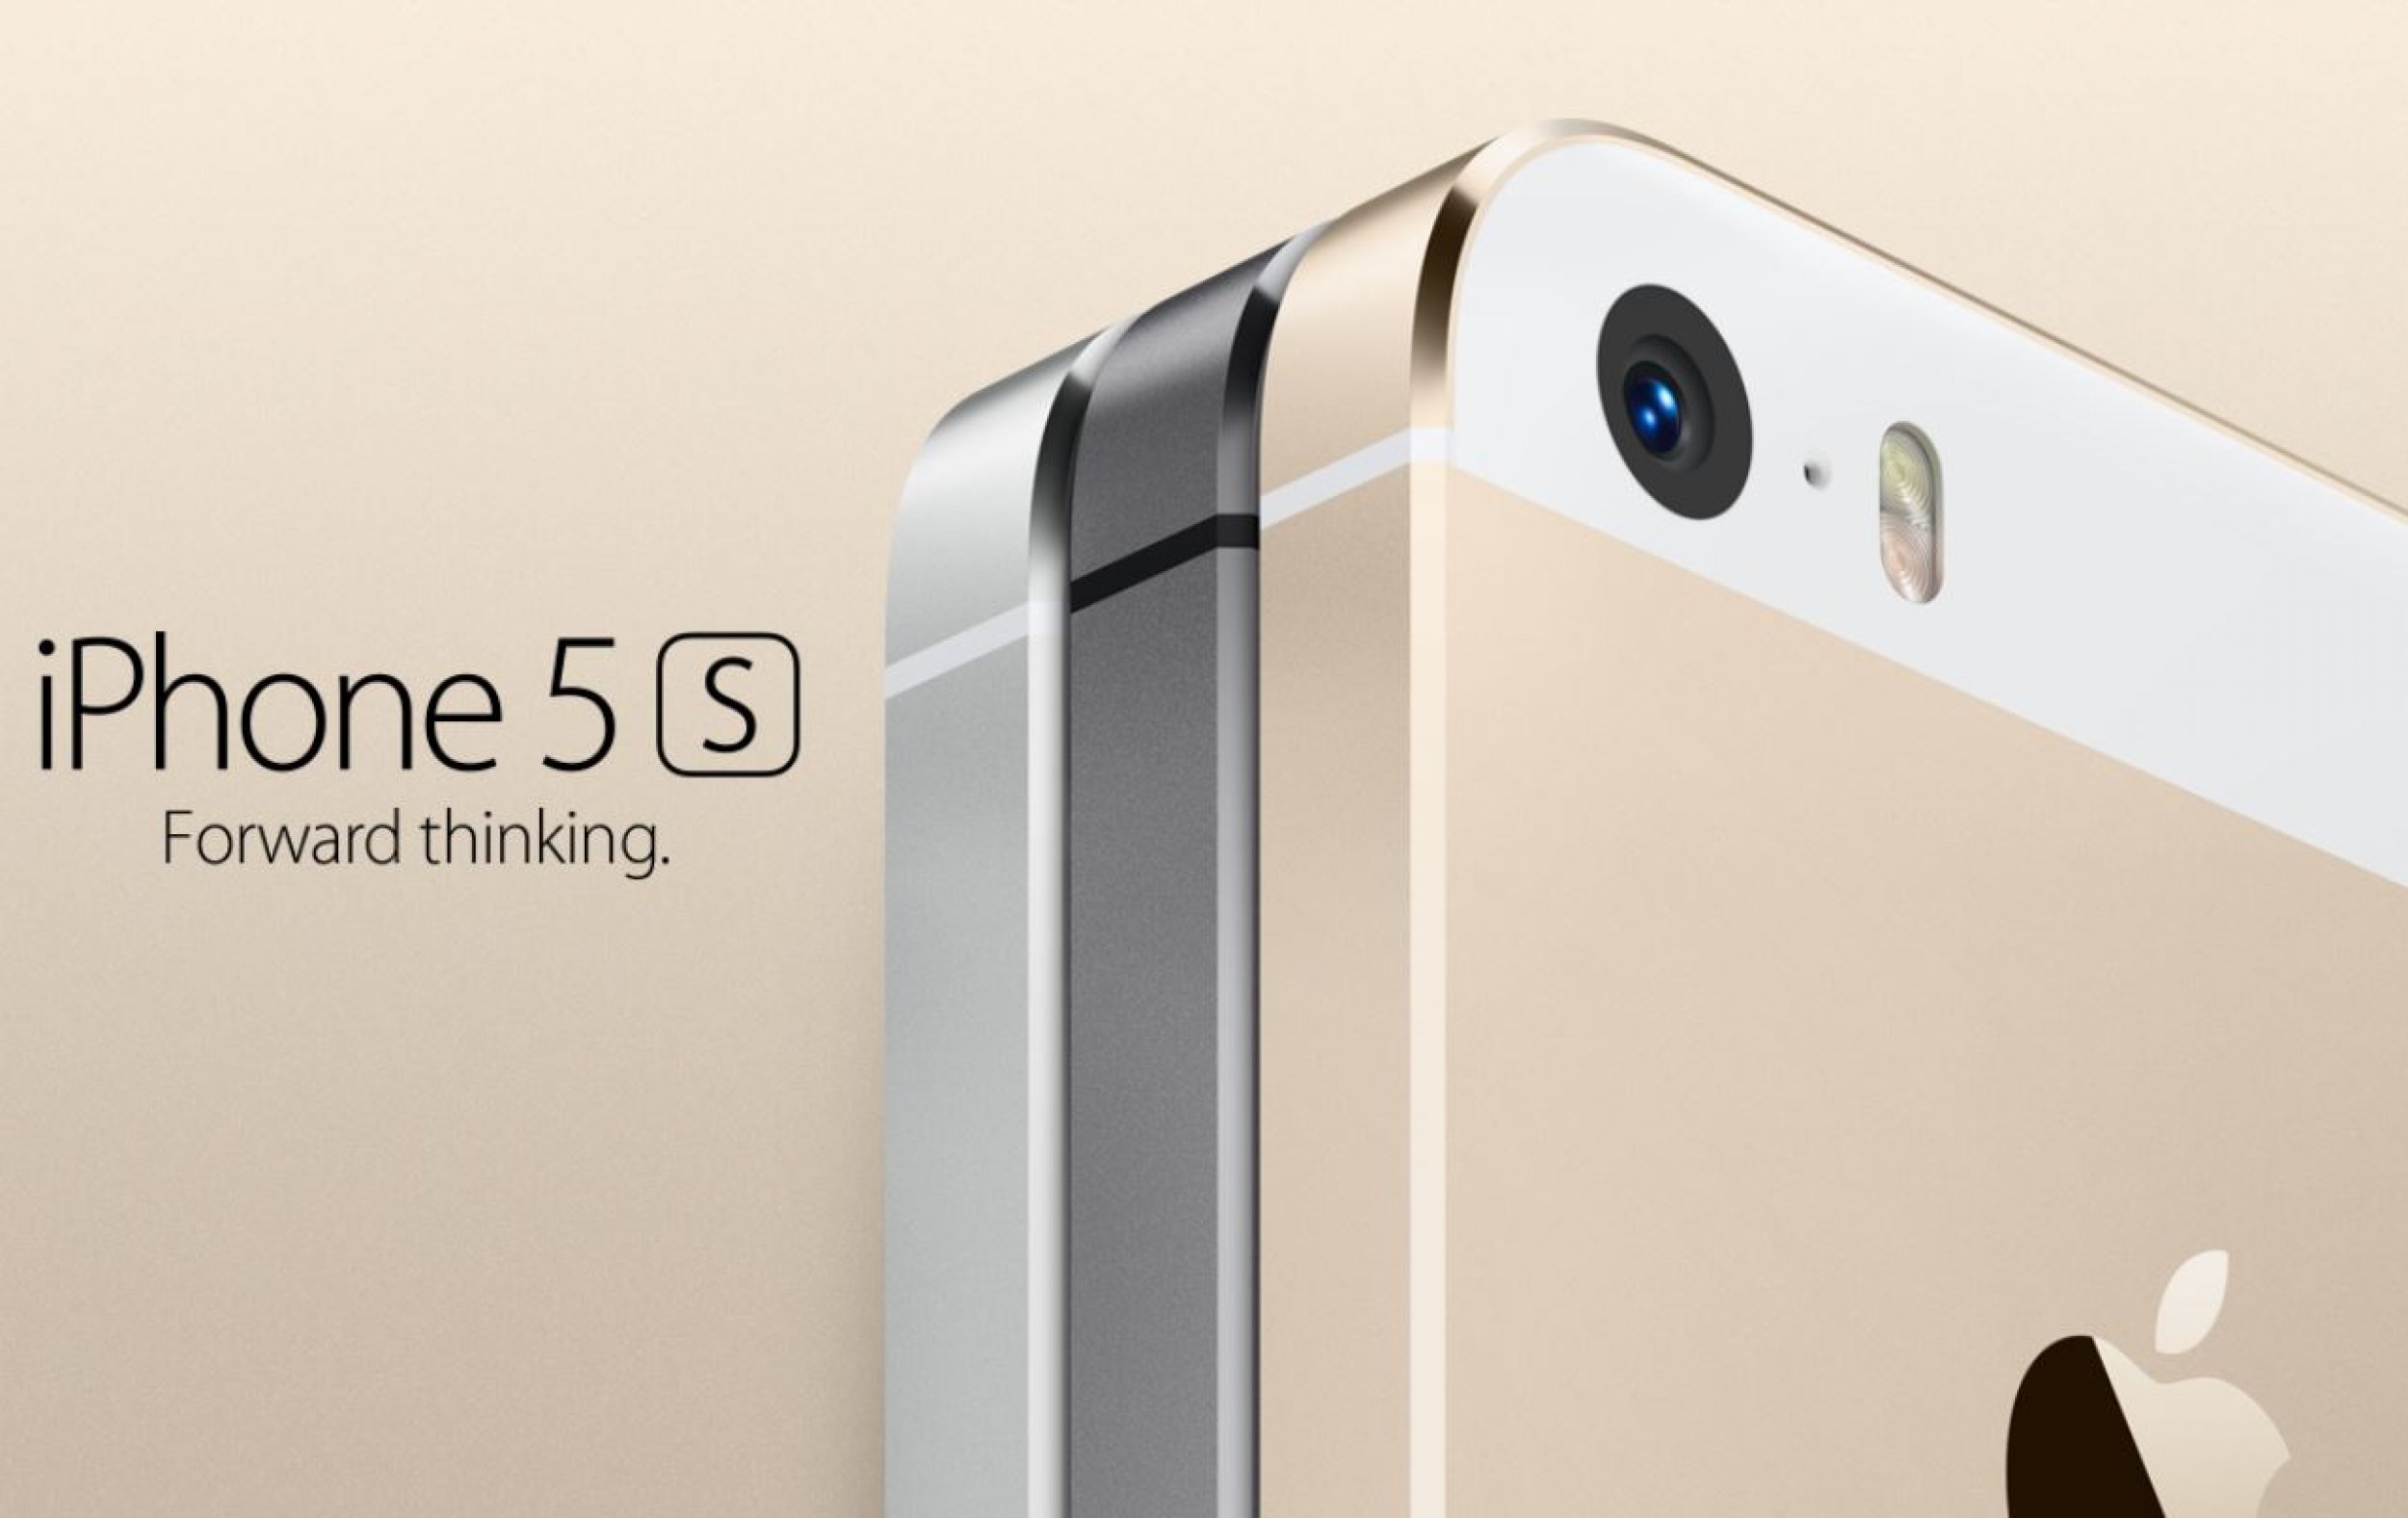 Apple Iphone 5s 5c Release Date Nears Online Orders Open At 12 01 A M Pdt Sept 20 In Store